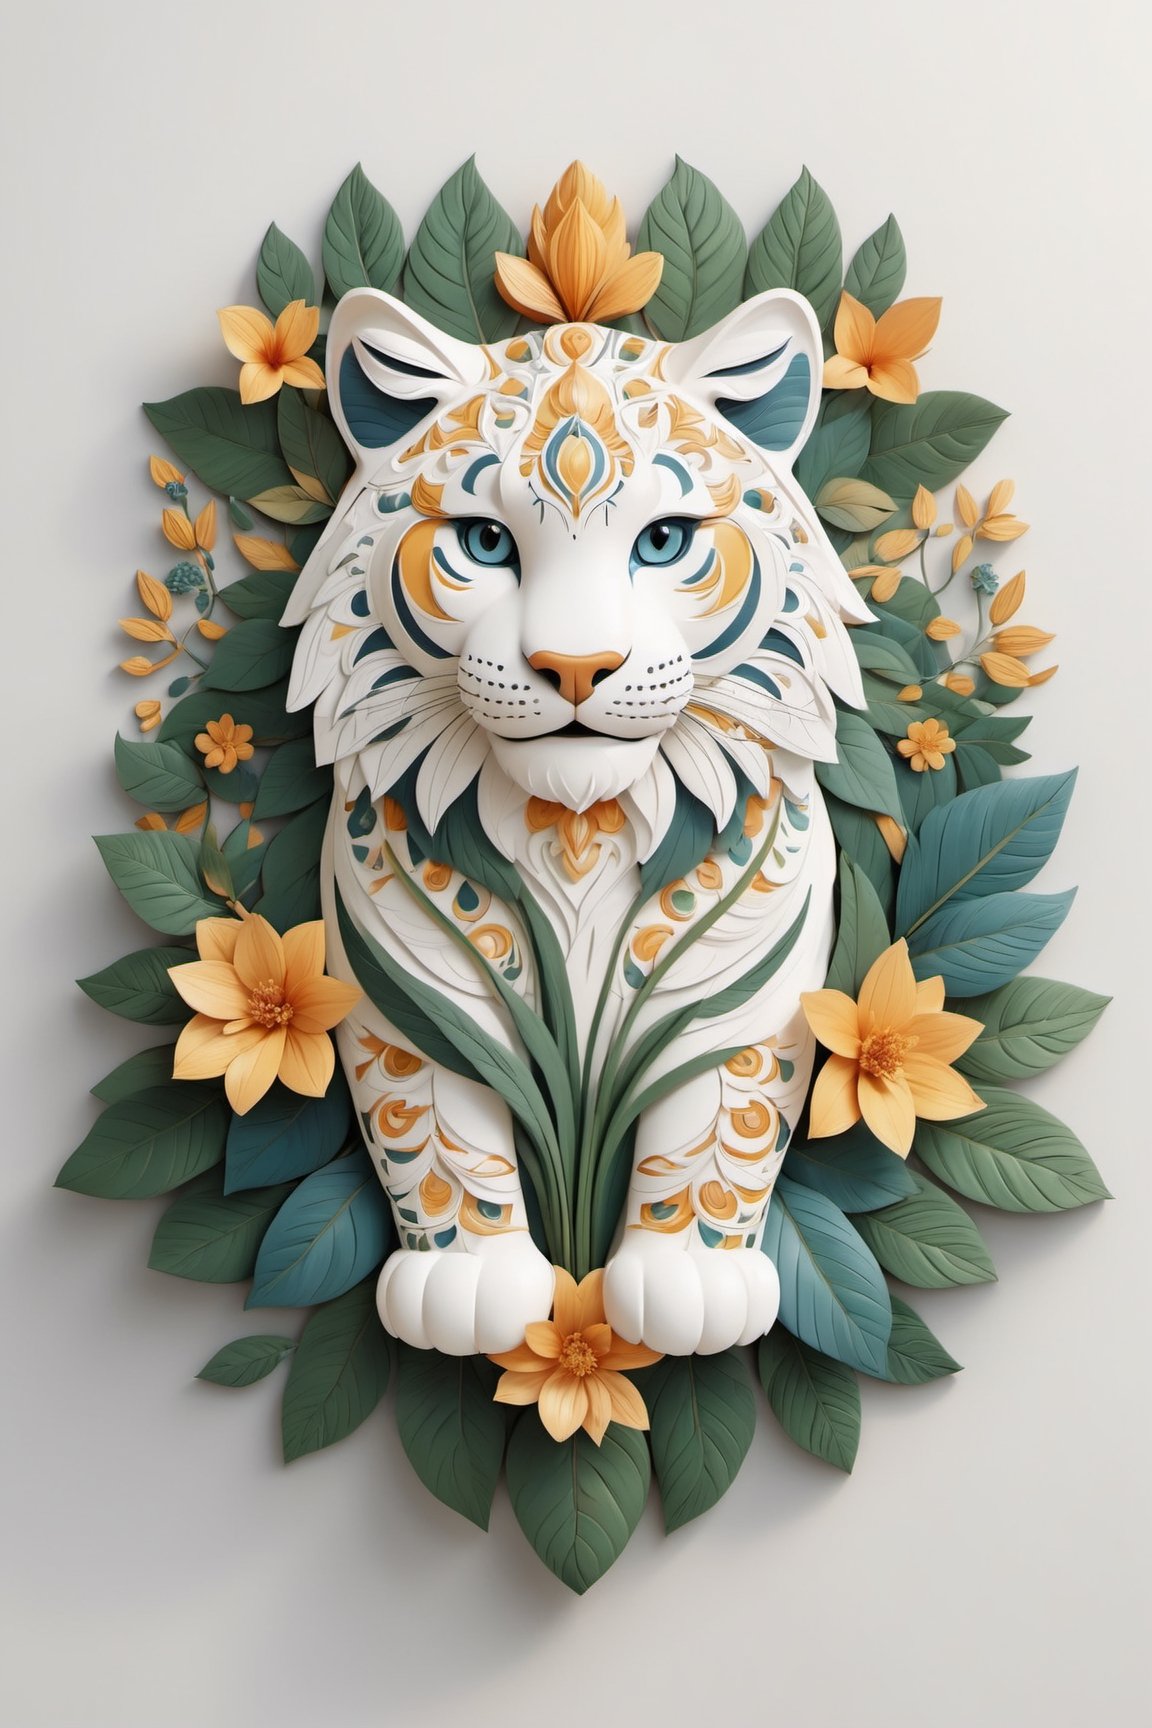 Paint a picture of the perfect balance between art and nature, Incorporate elements like flowers, leaves, animals, big cat smiling, and other natural patterns to create a unique and intricate design, symmetrical,perfect_symmetry,Leonardo Style,oni style, line_art,3d style, white background